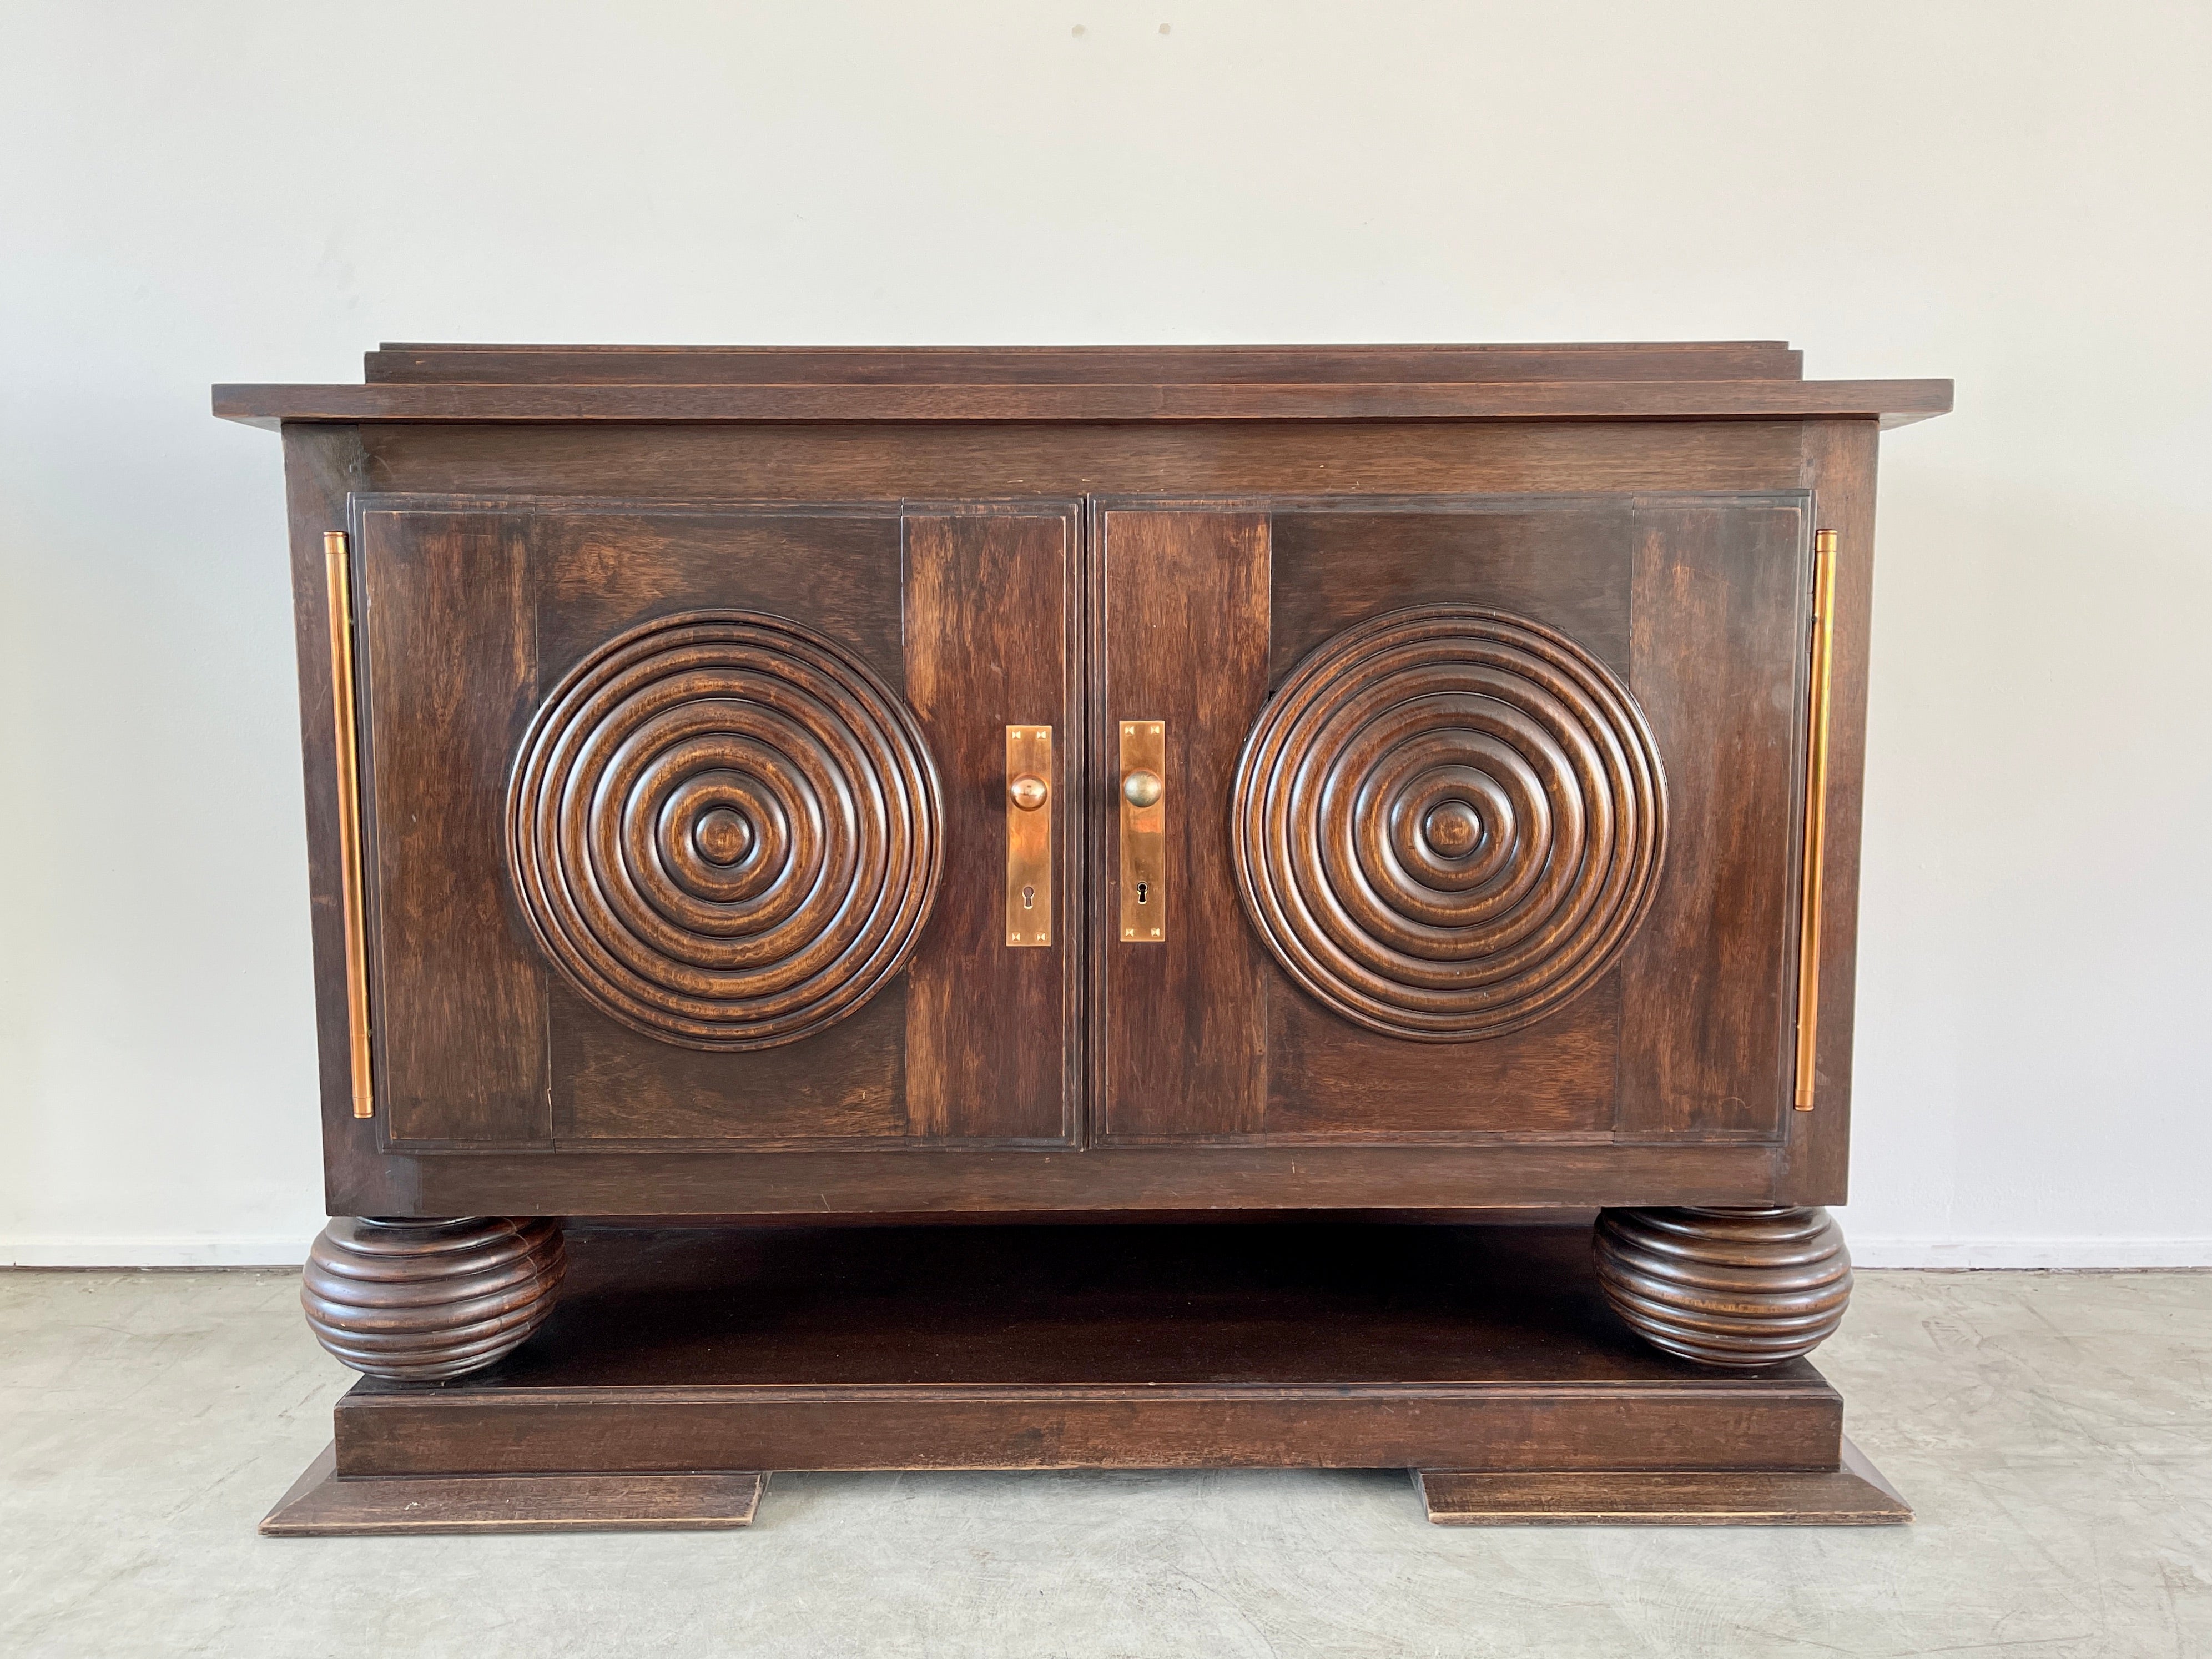 Charles Dudouyt cabinet floating on giant carved ball feet.
Wonderful original rich patina
Cabinet have 2 doors with carved concentric circles which opens to shelving 
Copper / brass hardware.